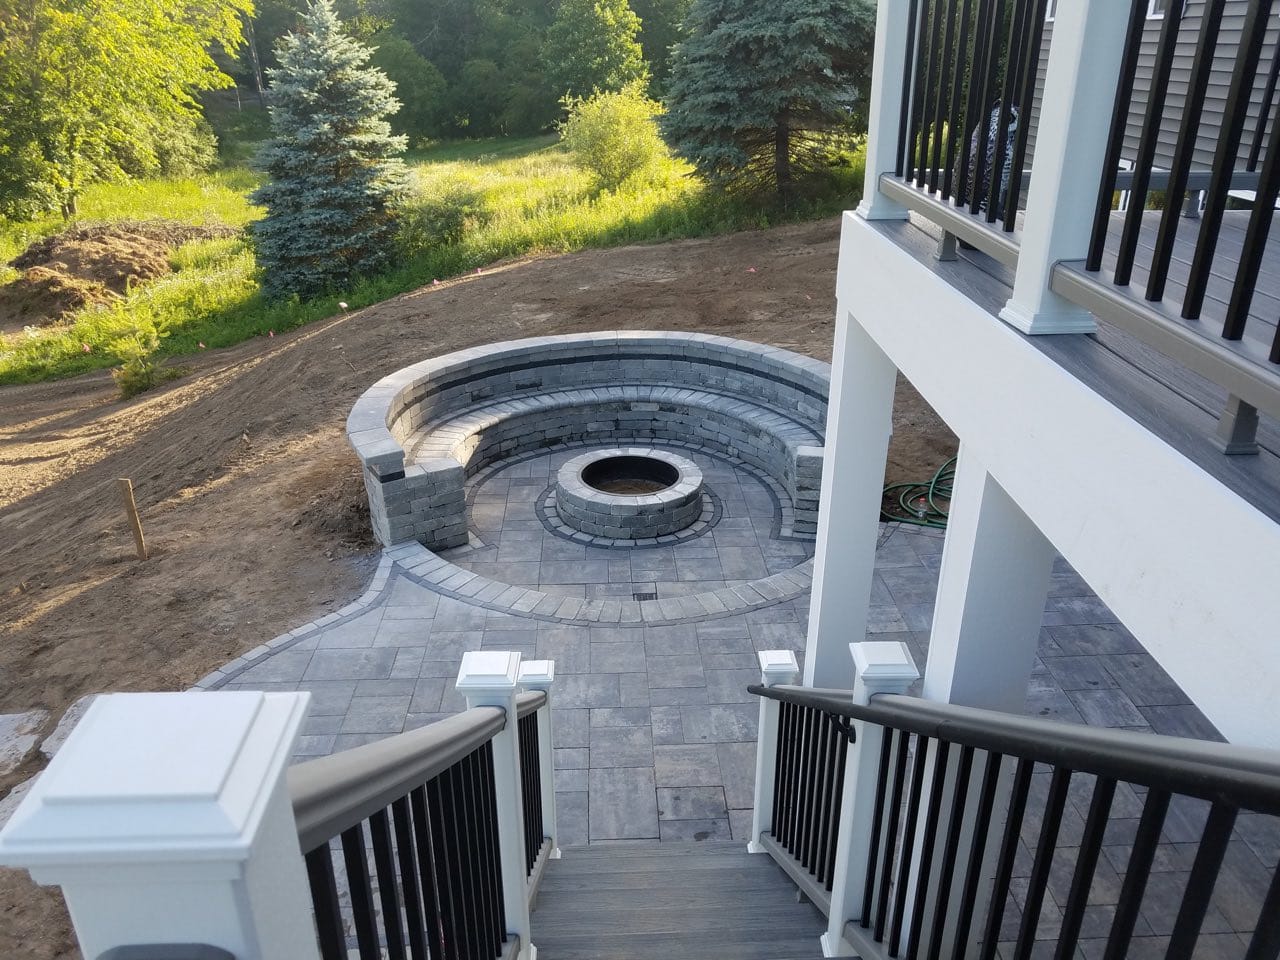 An outdoor fire feature (fire pit) being built in the middle of a circular stone patio set, steps away from the steps of an upper-floor deck.